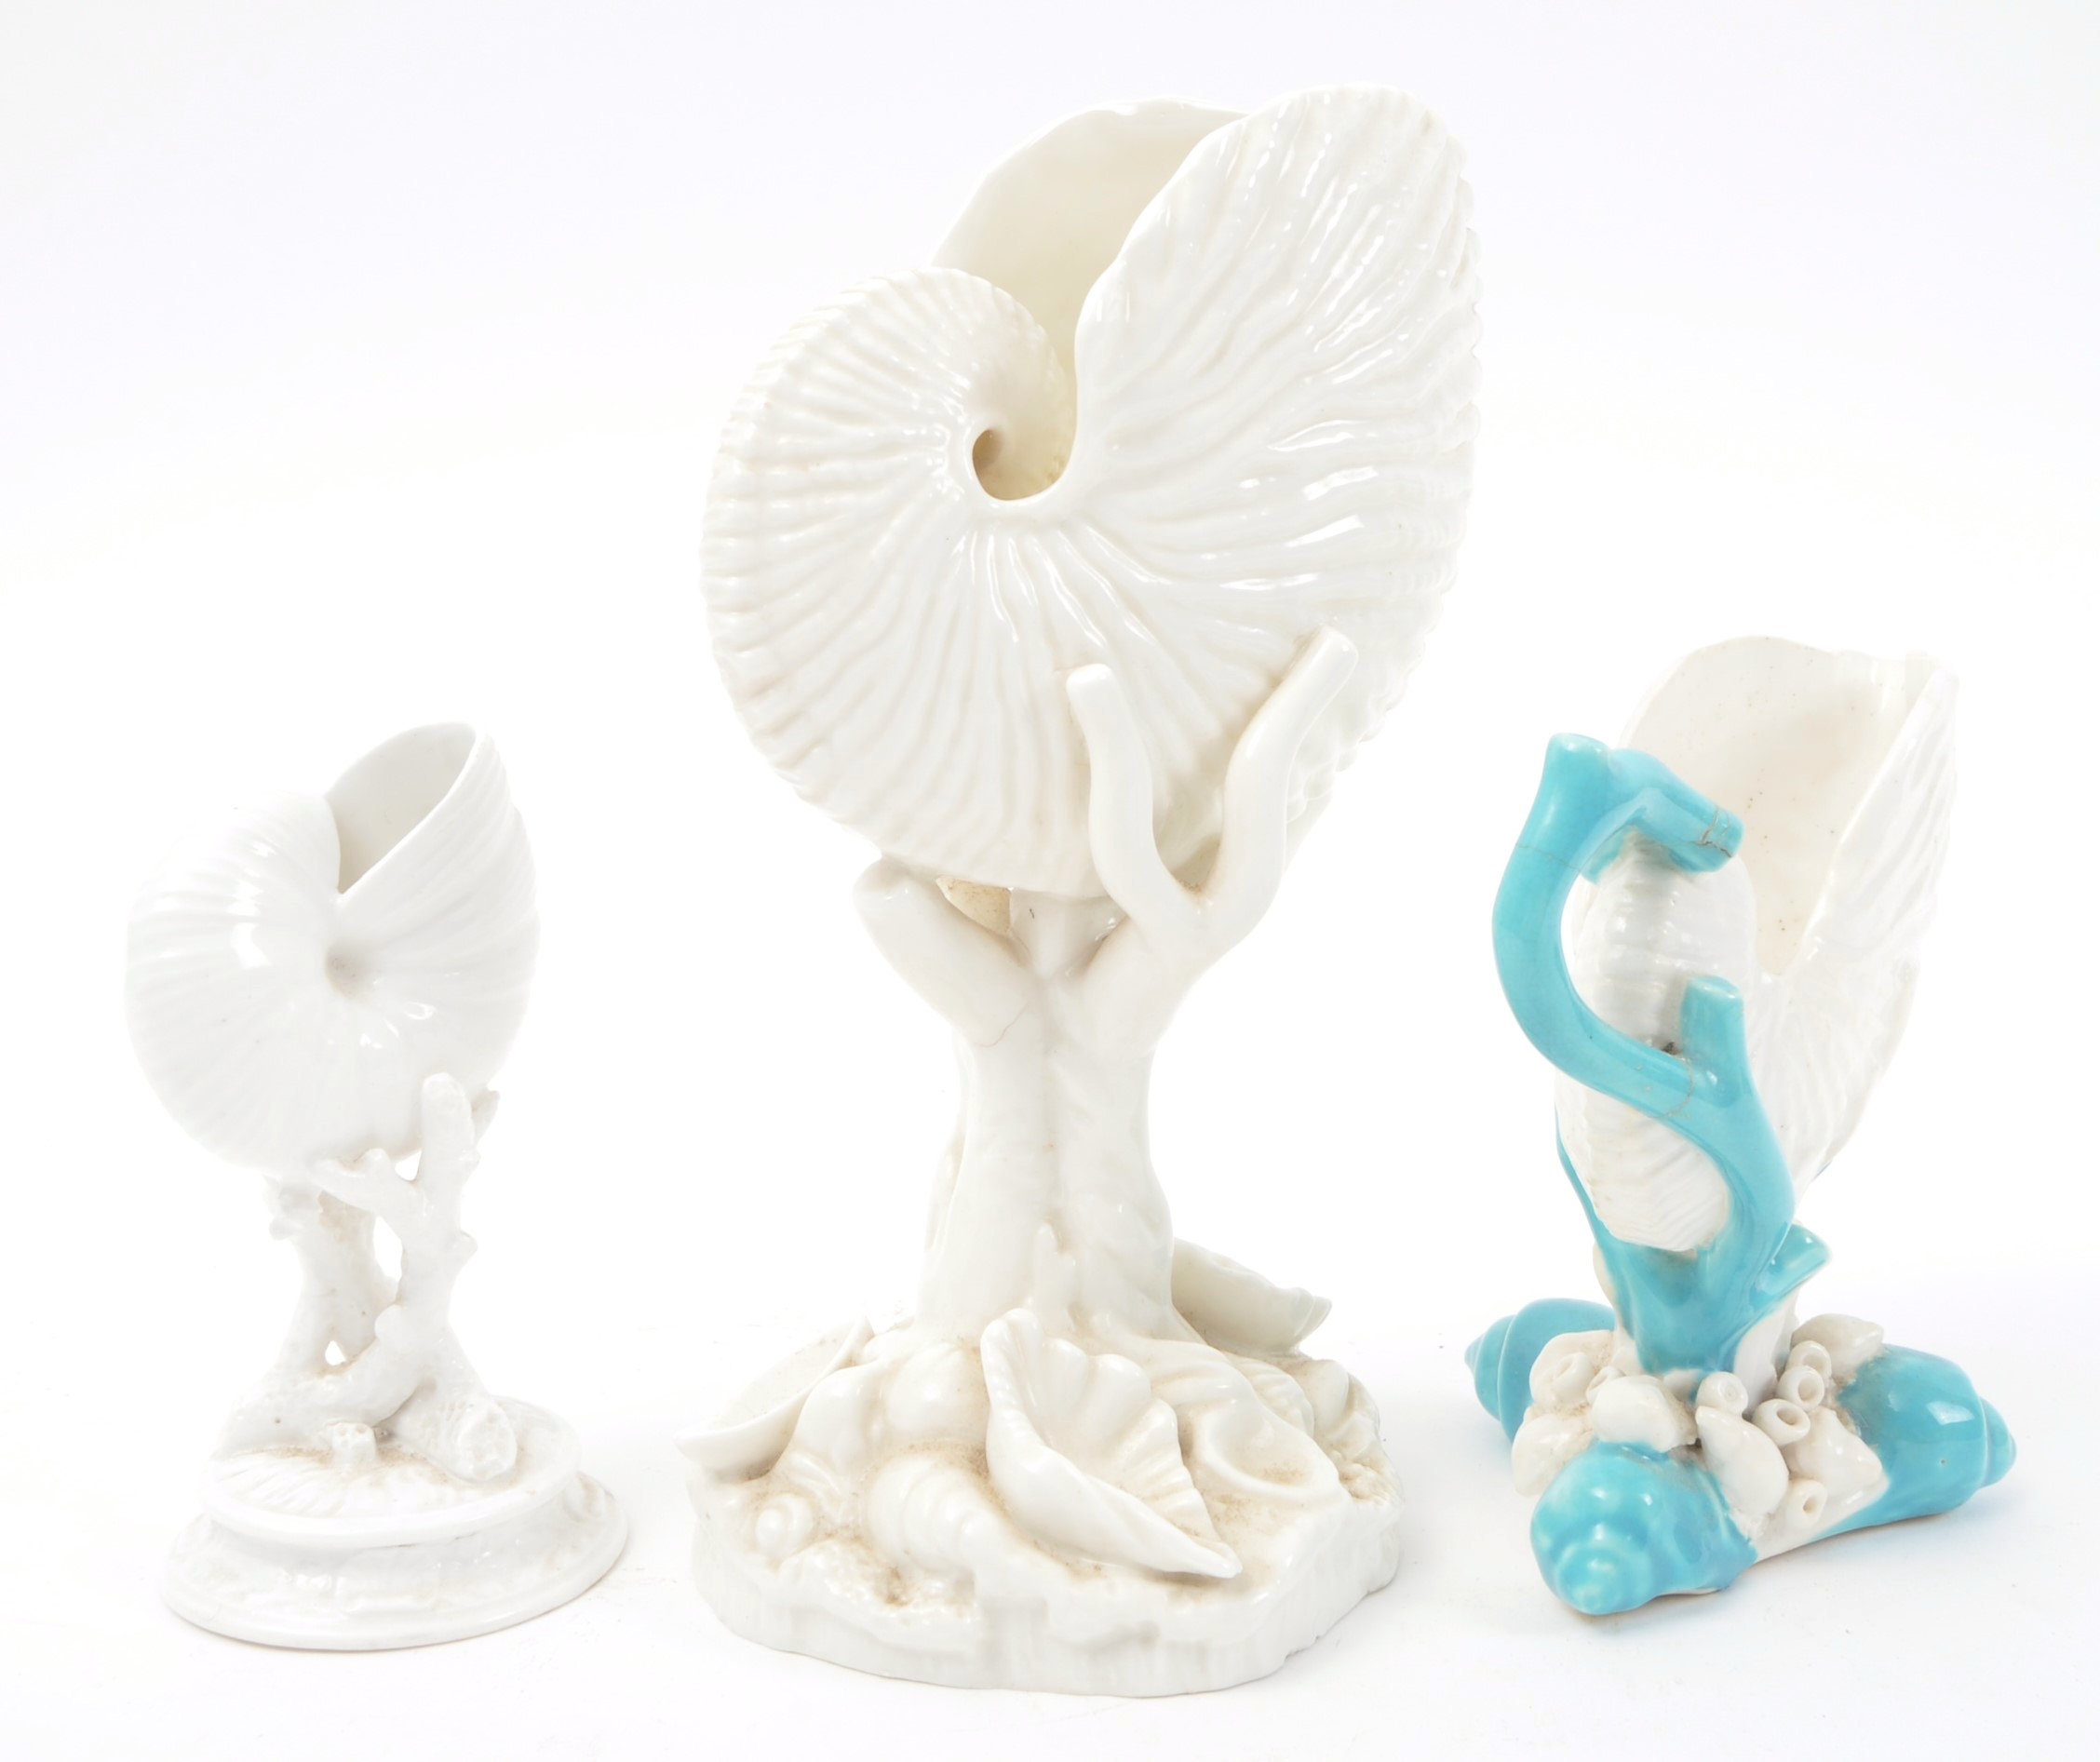 THREE LATE 19TH CENTURY WHITE PORCELAIN SHELL DISPLAYS